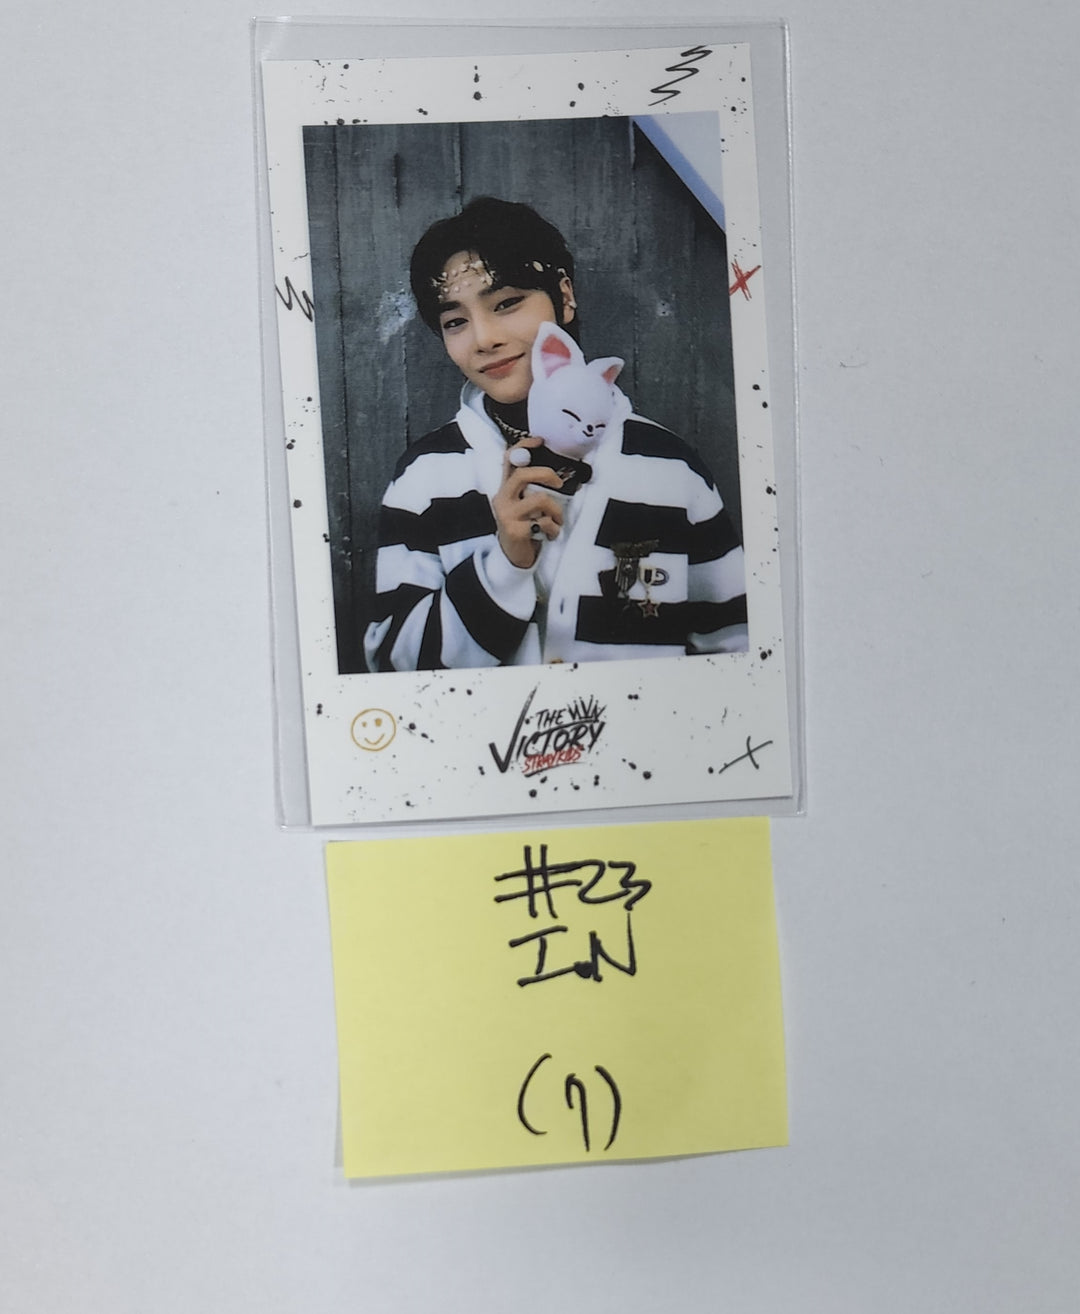 Stray Kids X SKZOO Pop-Up Store 'THE VICTORY' - Pre-Order Benefit Polaroid Type Photocard - Only one Purchase per each variation allowed!